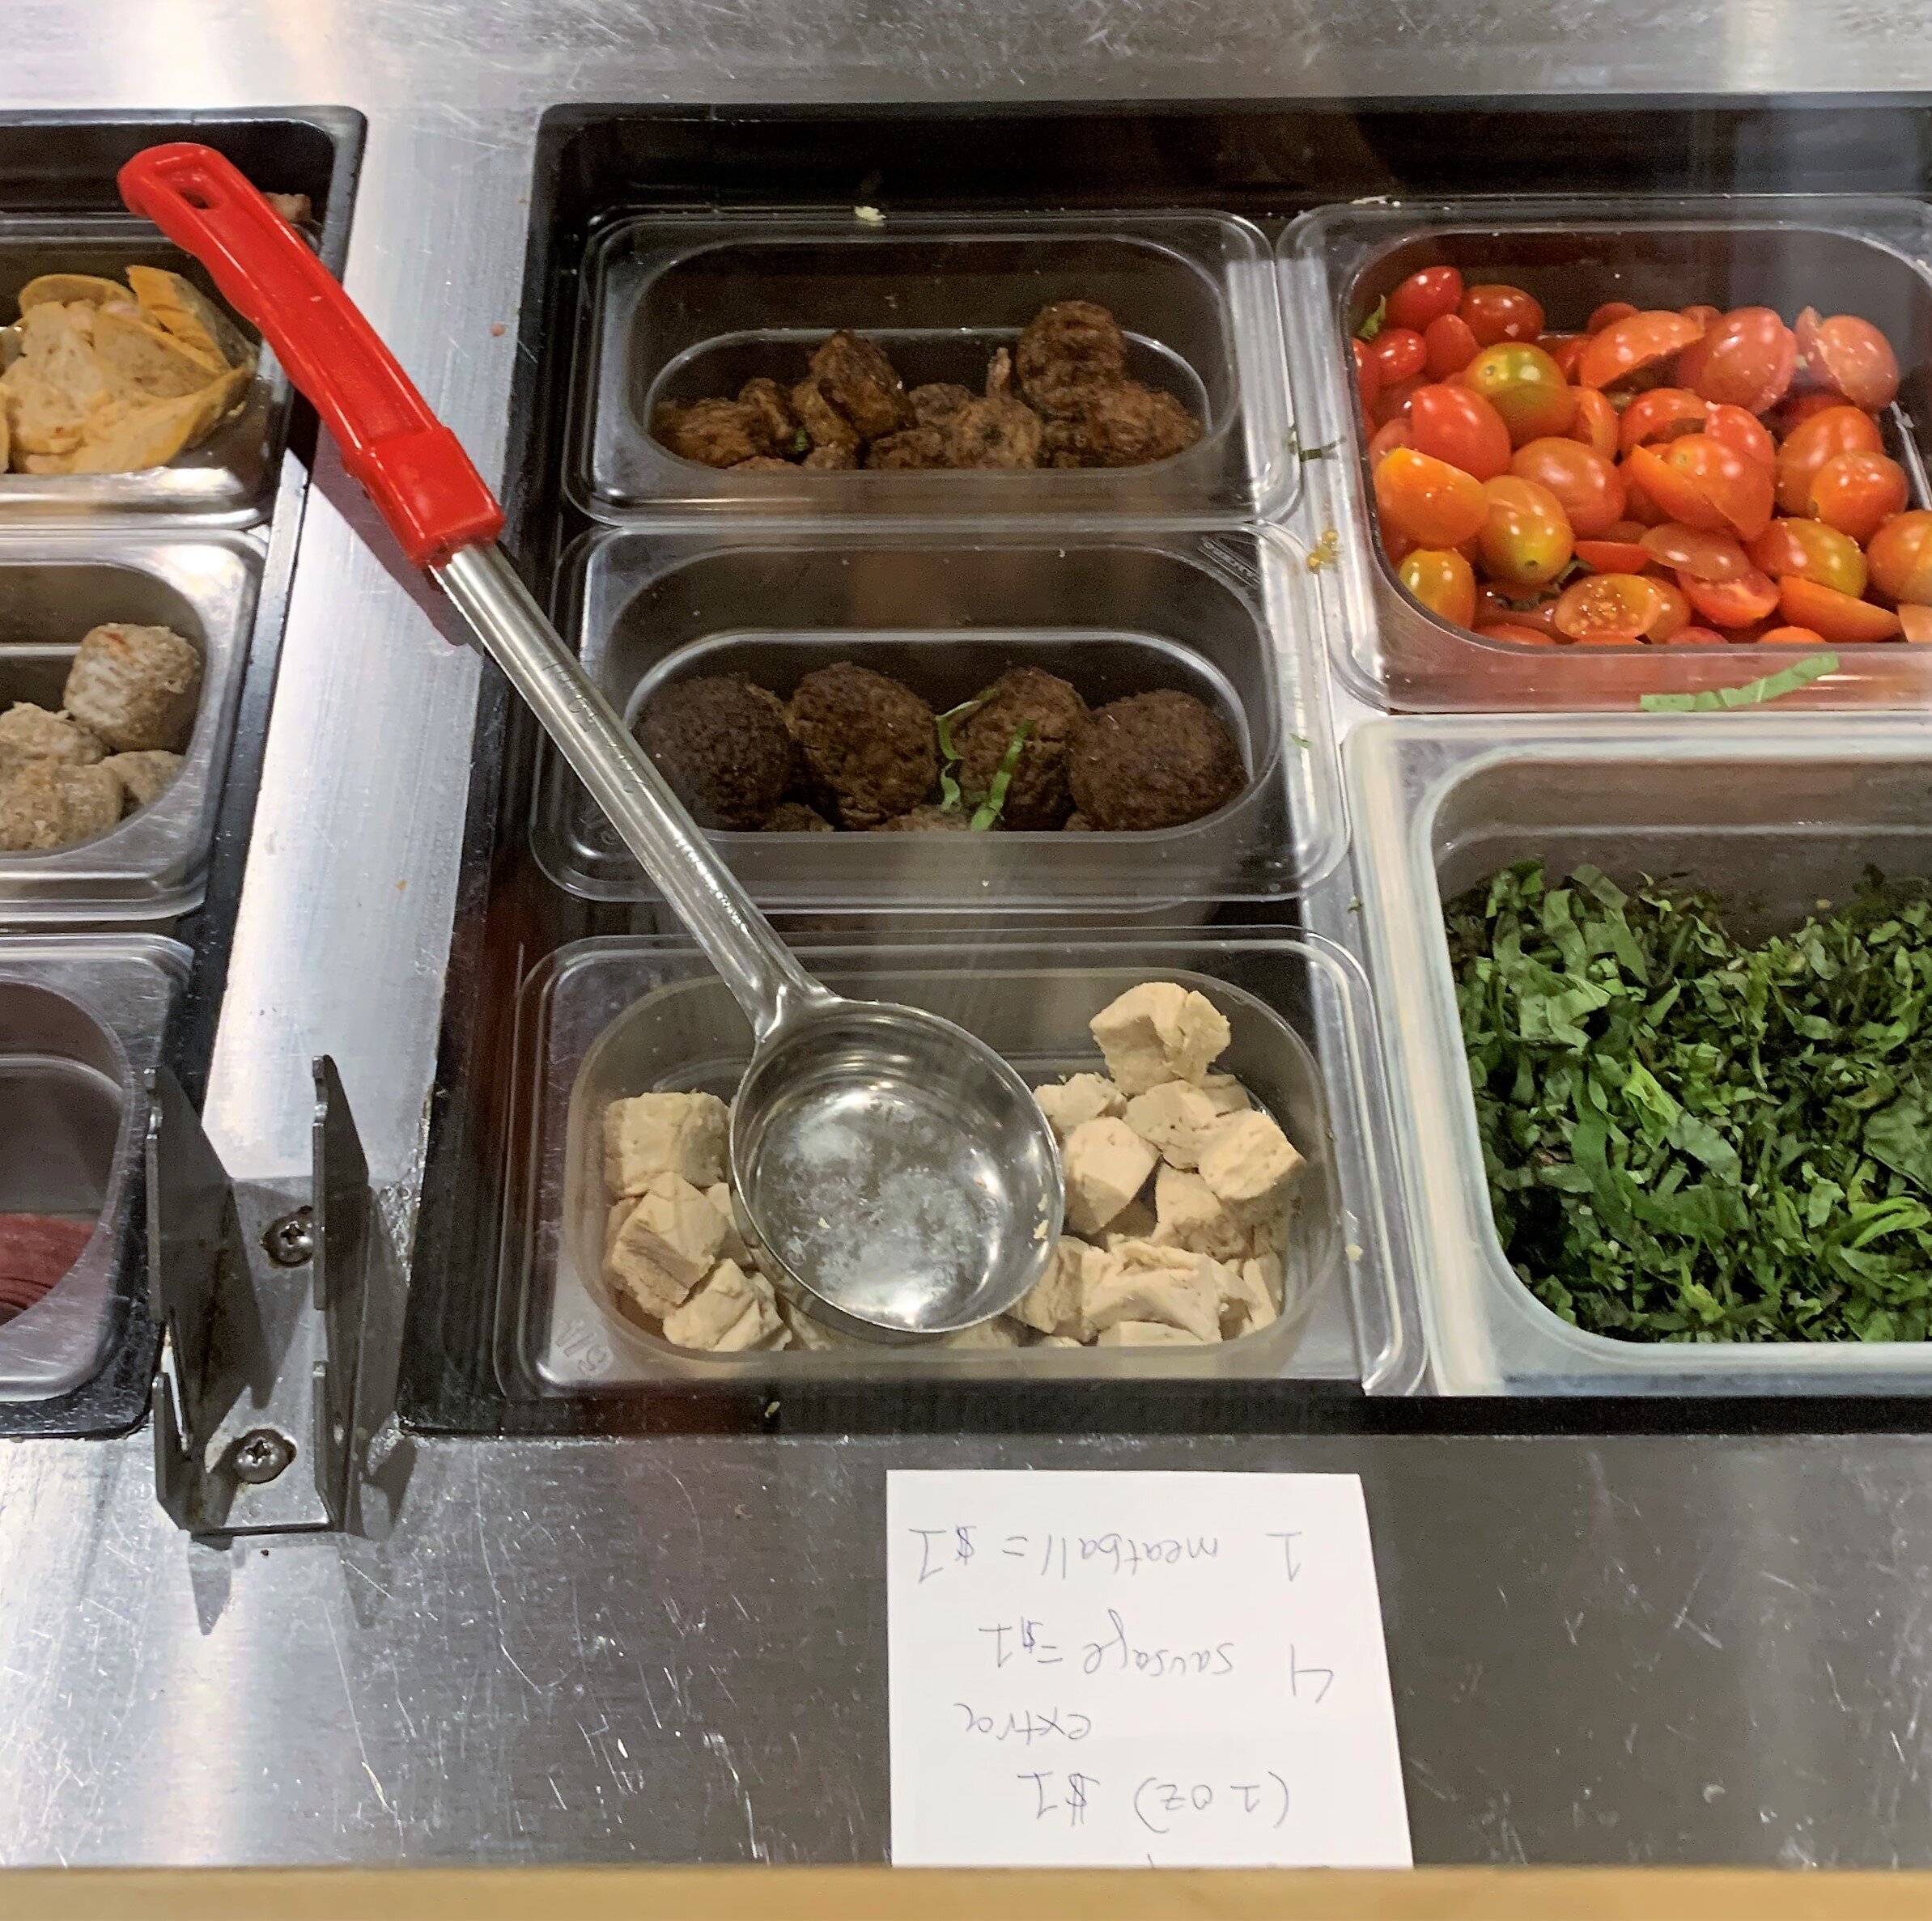 New plant proteins at Pieology Pizzeria which are Gardein's chicken, sausage, and meatball